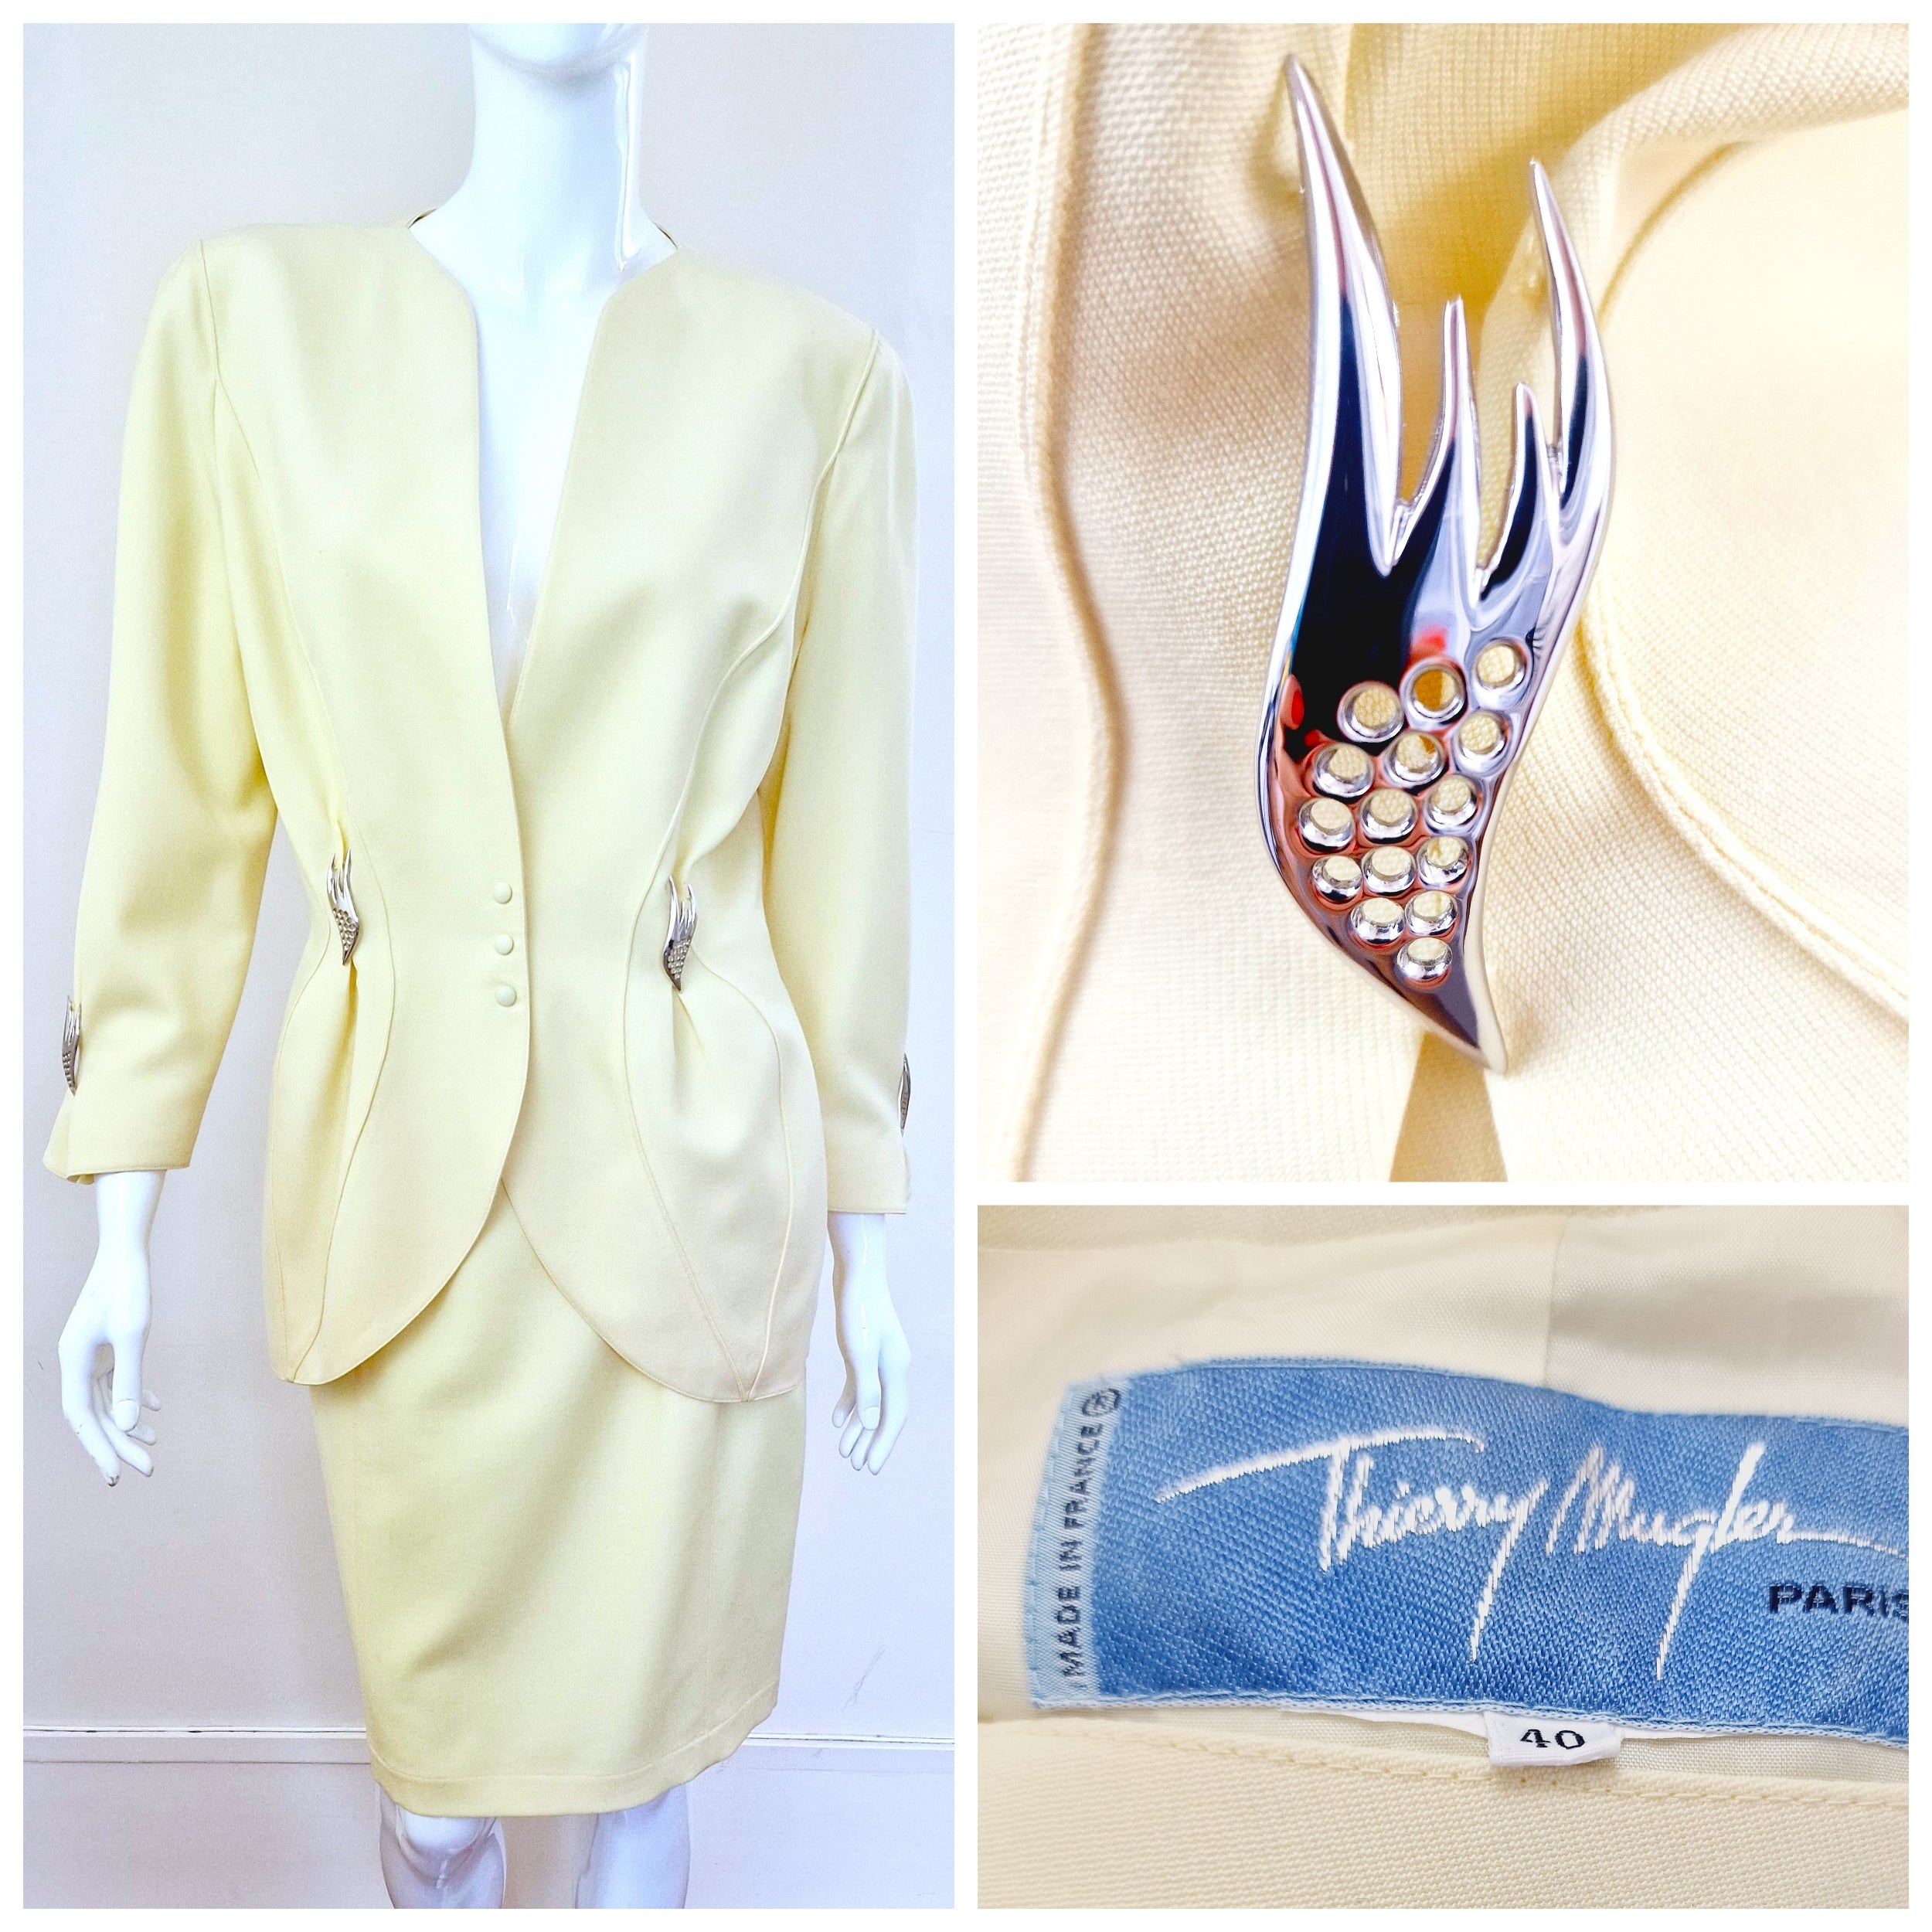  Thierry Mugler Yellow Metal Shiny Star Large Evening Vampir Couture Dress Suit  For Sale